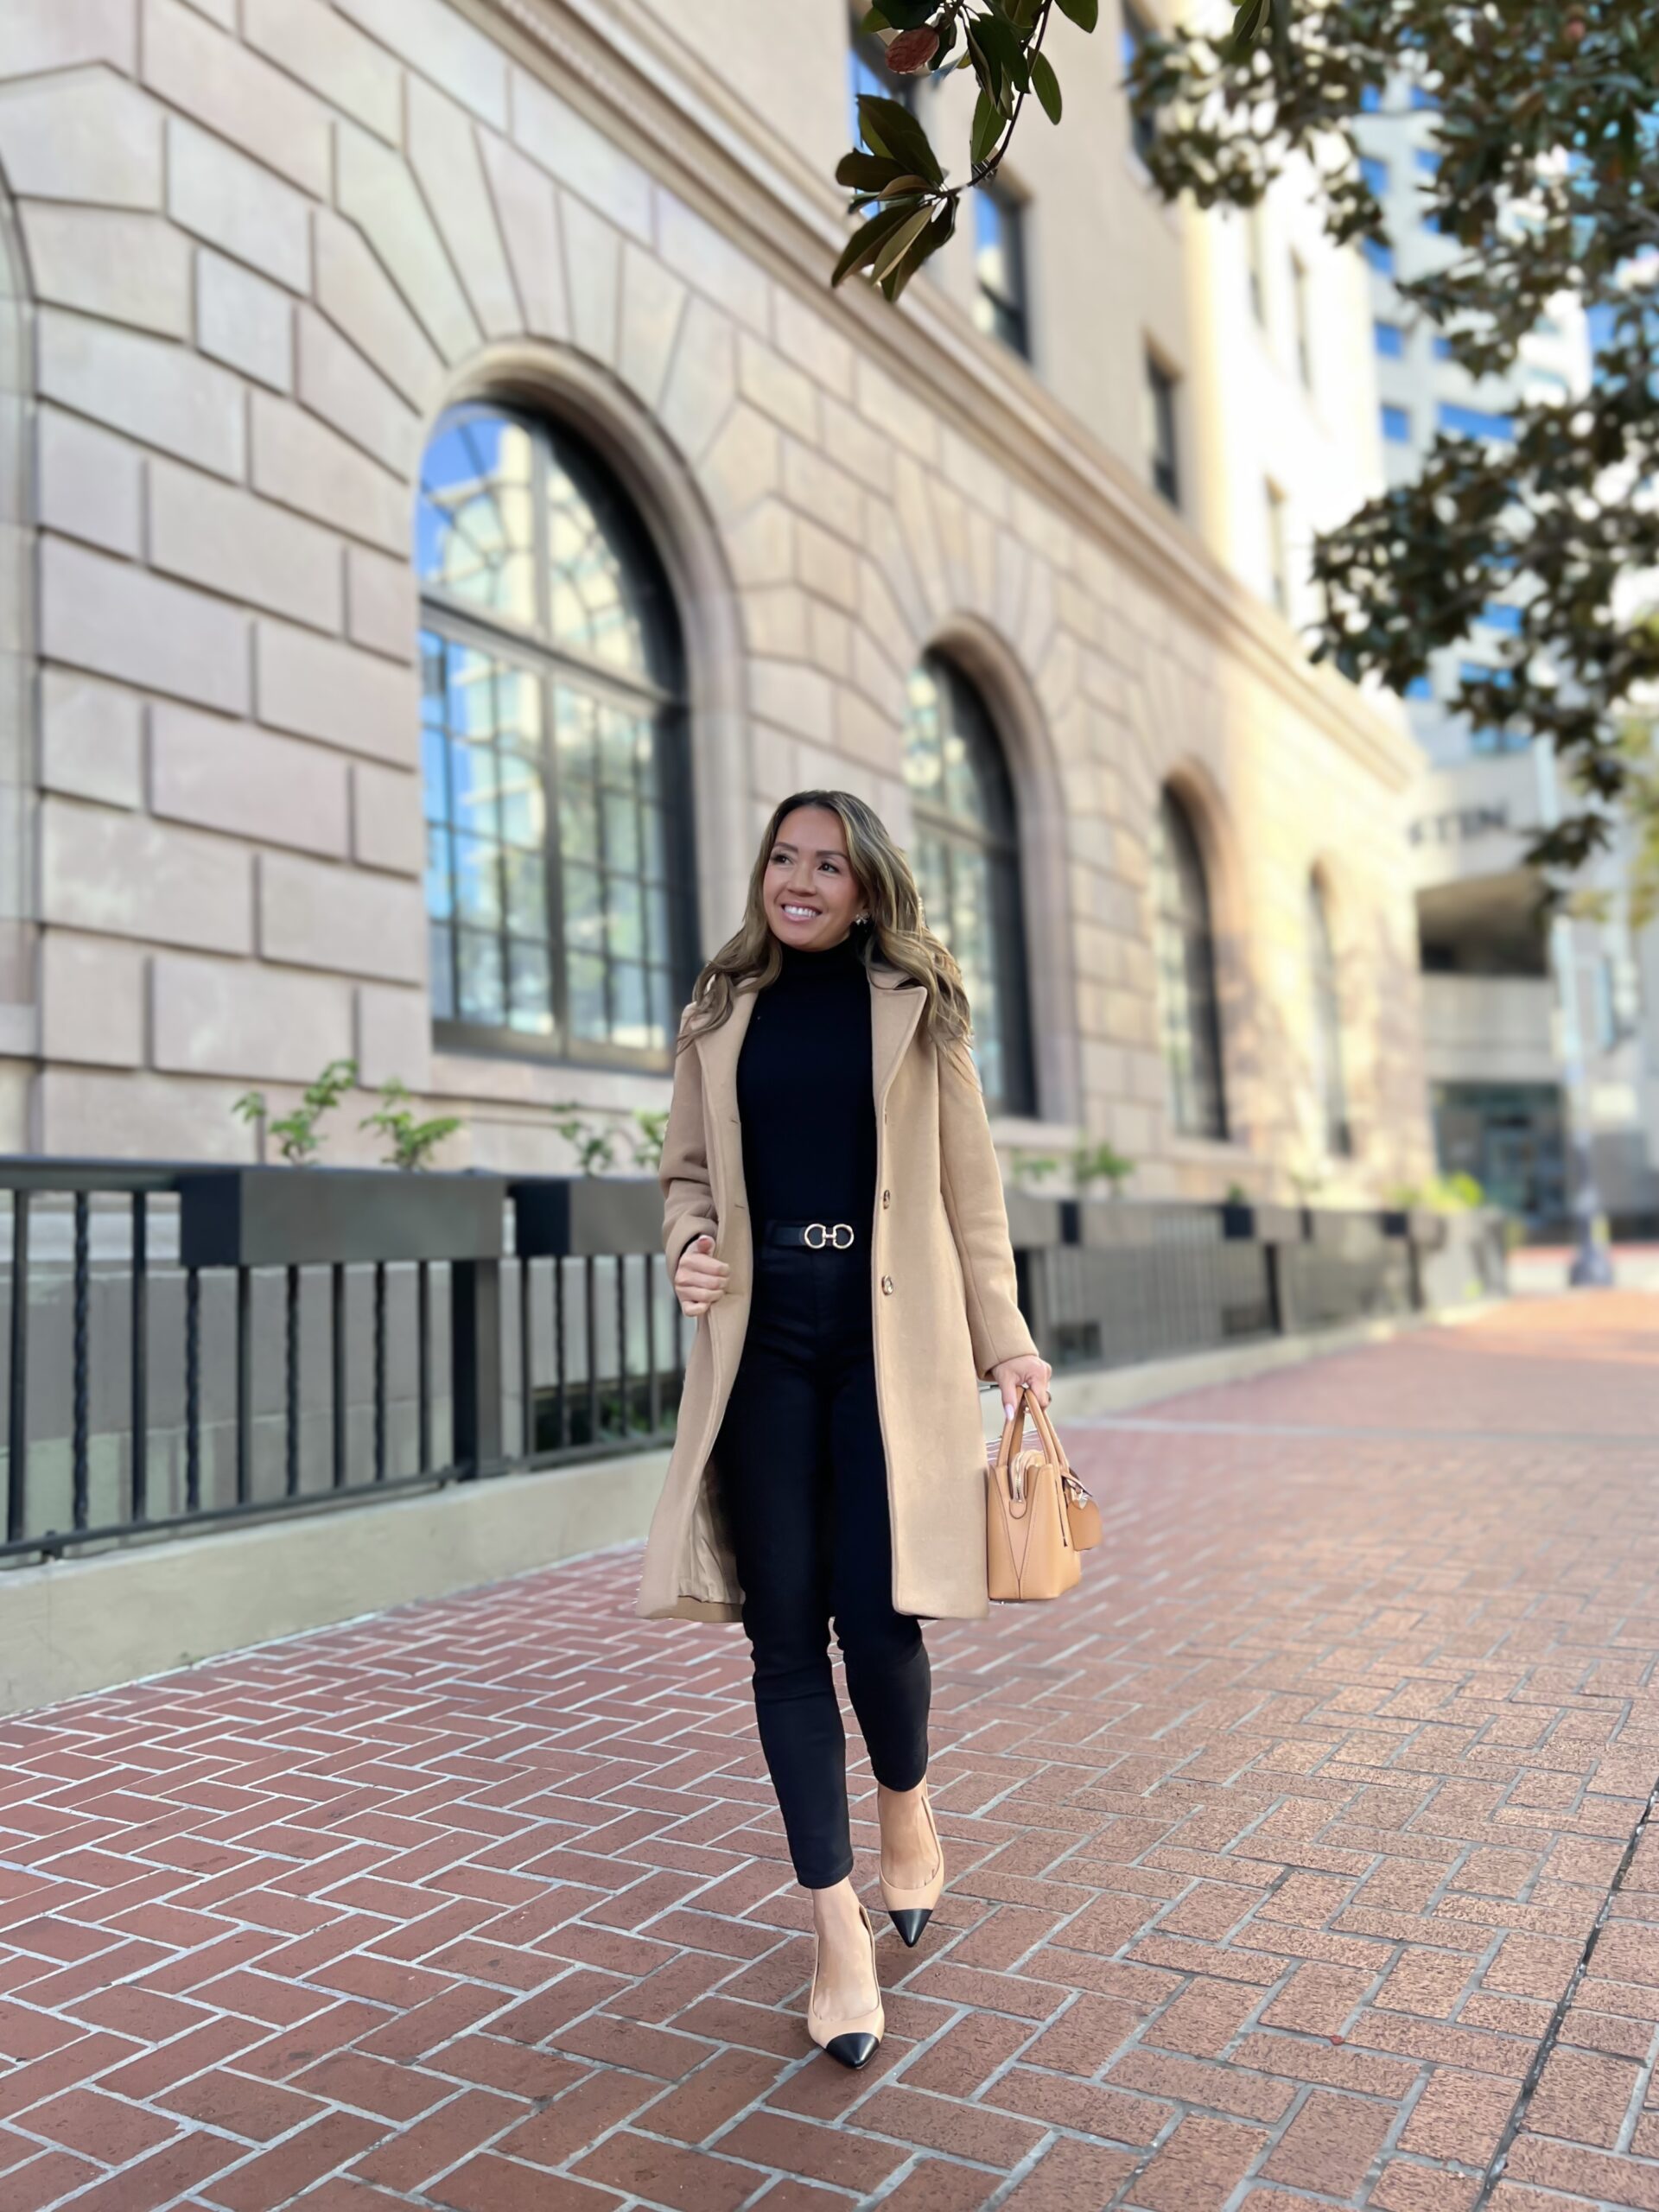 Fall Outfits Archives - Stylish Petite